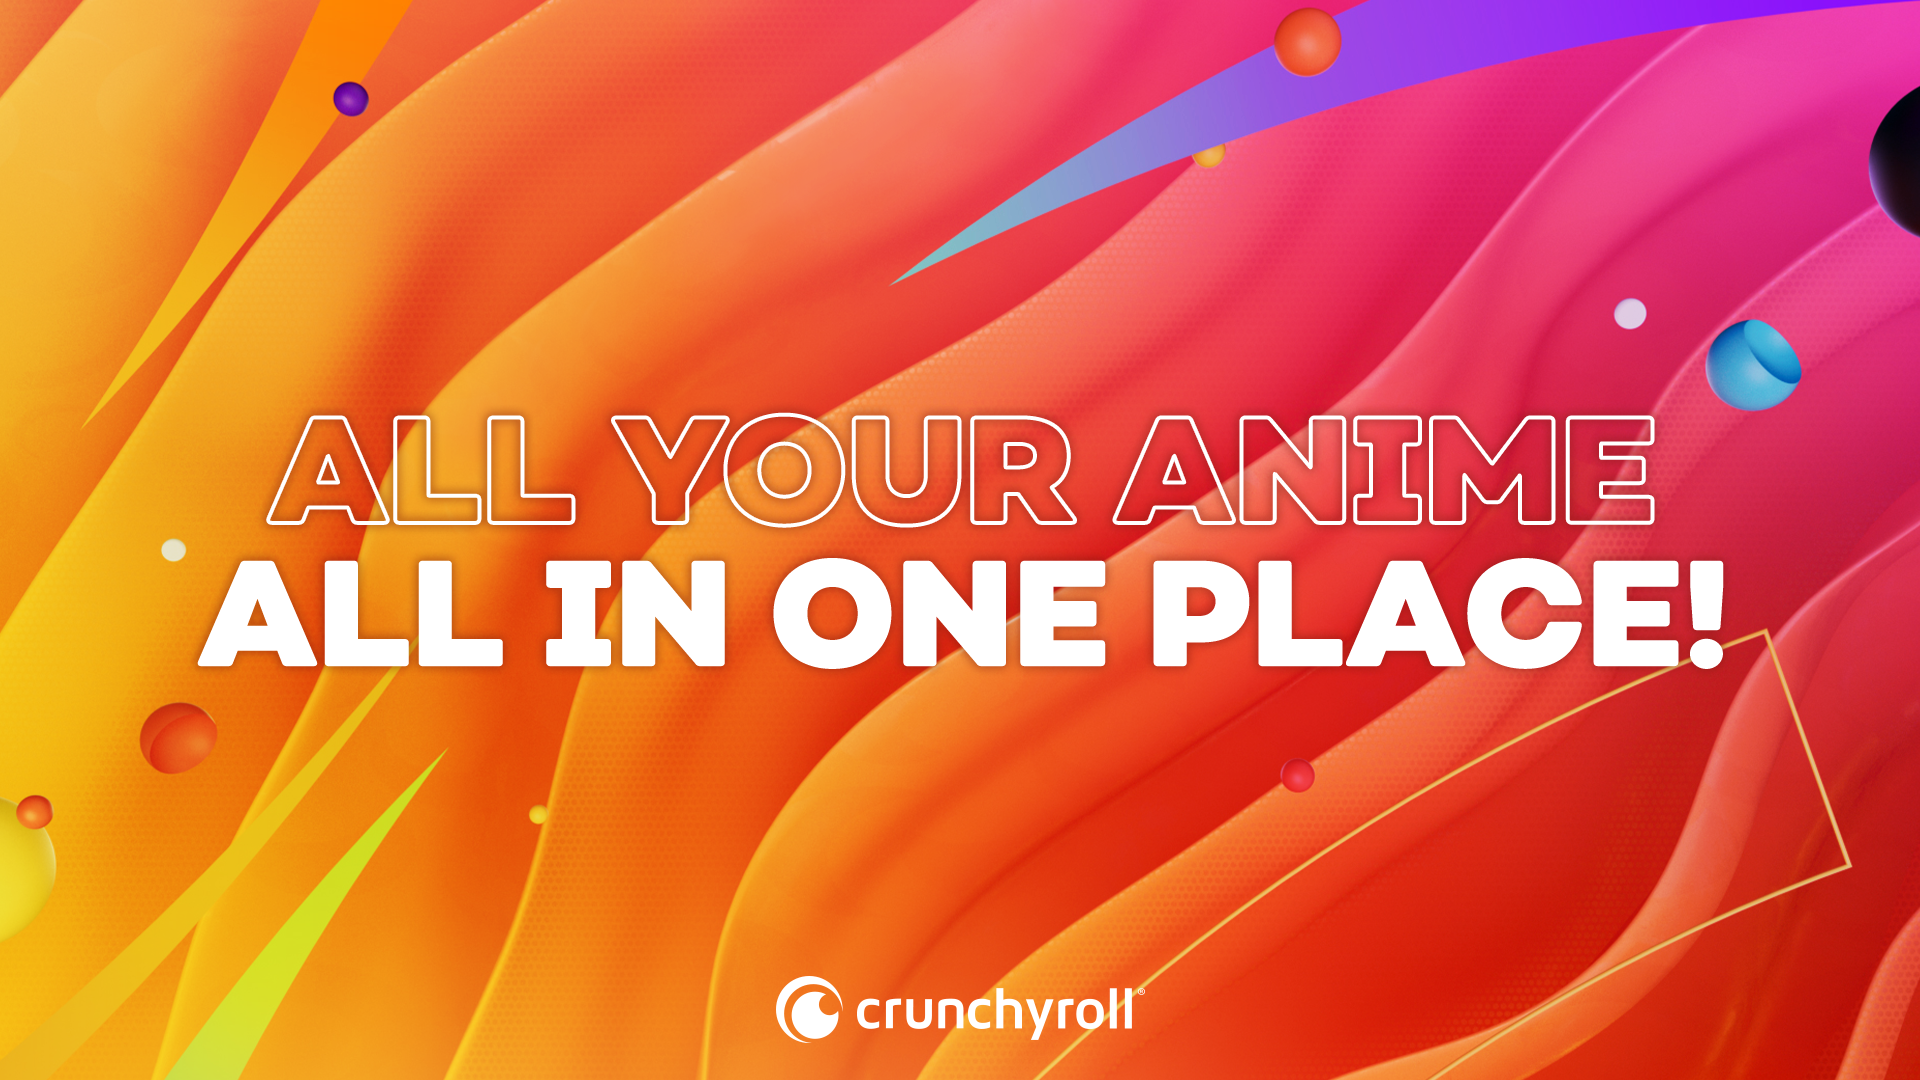 Image: Crunchyroll Hime with text "All your anime in one place!"